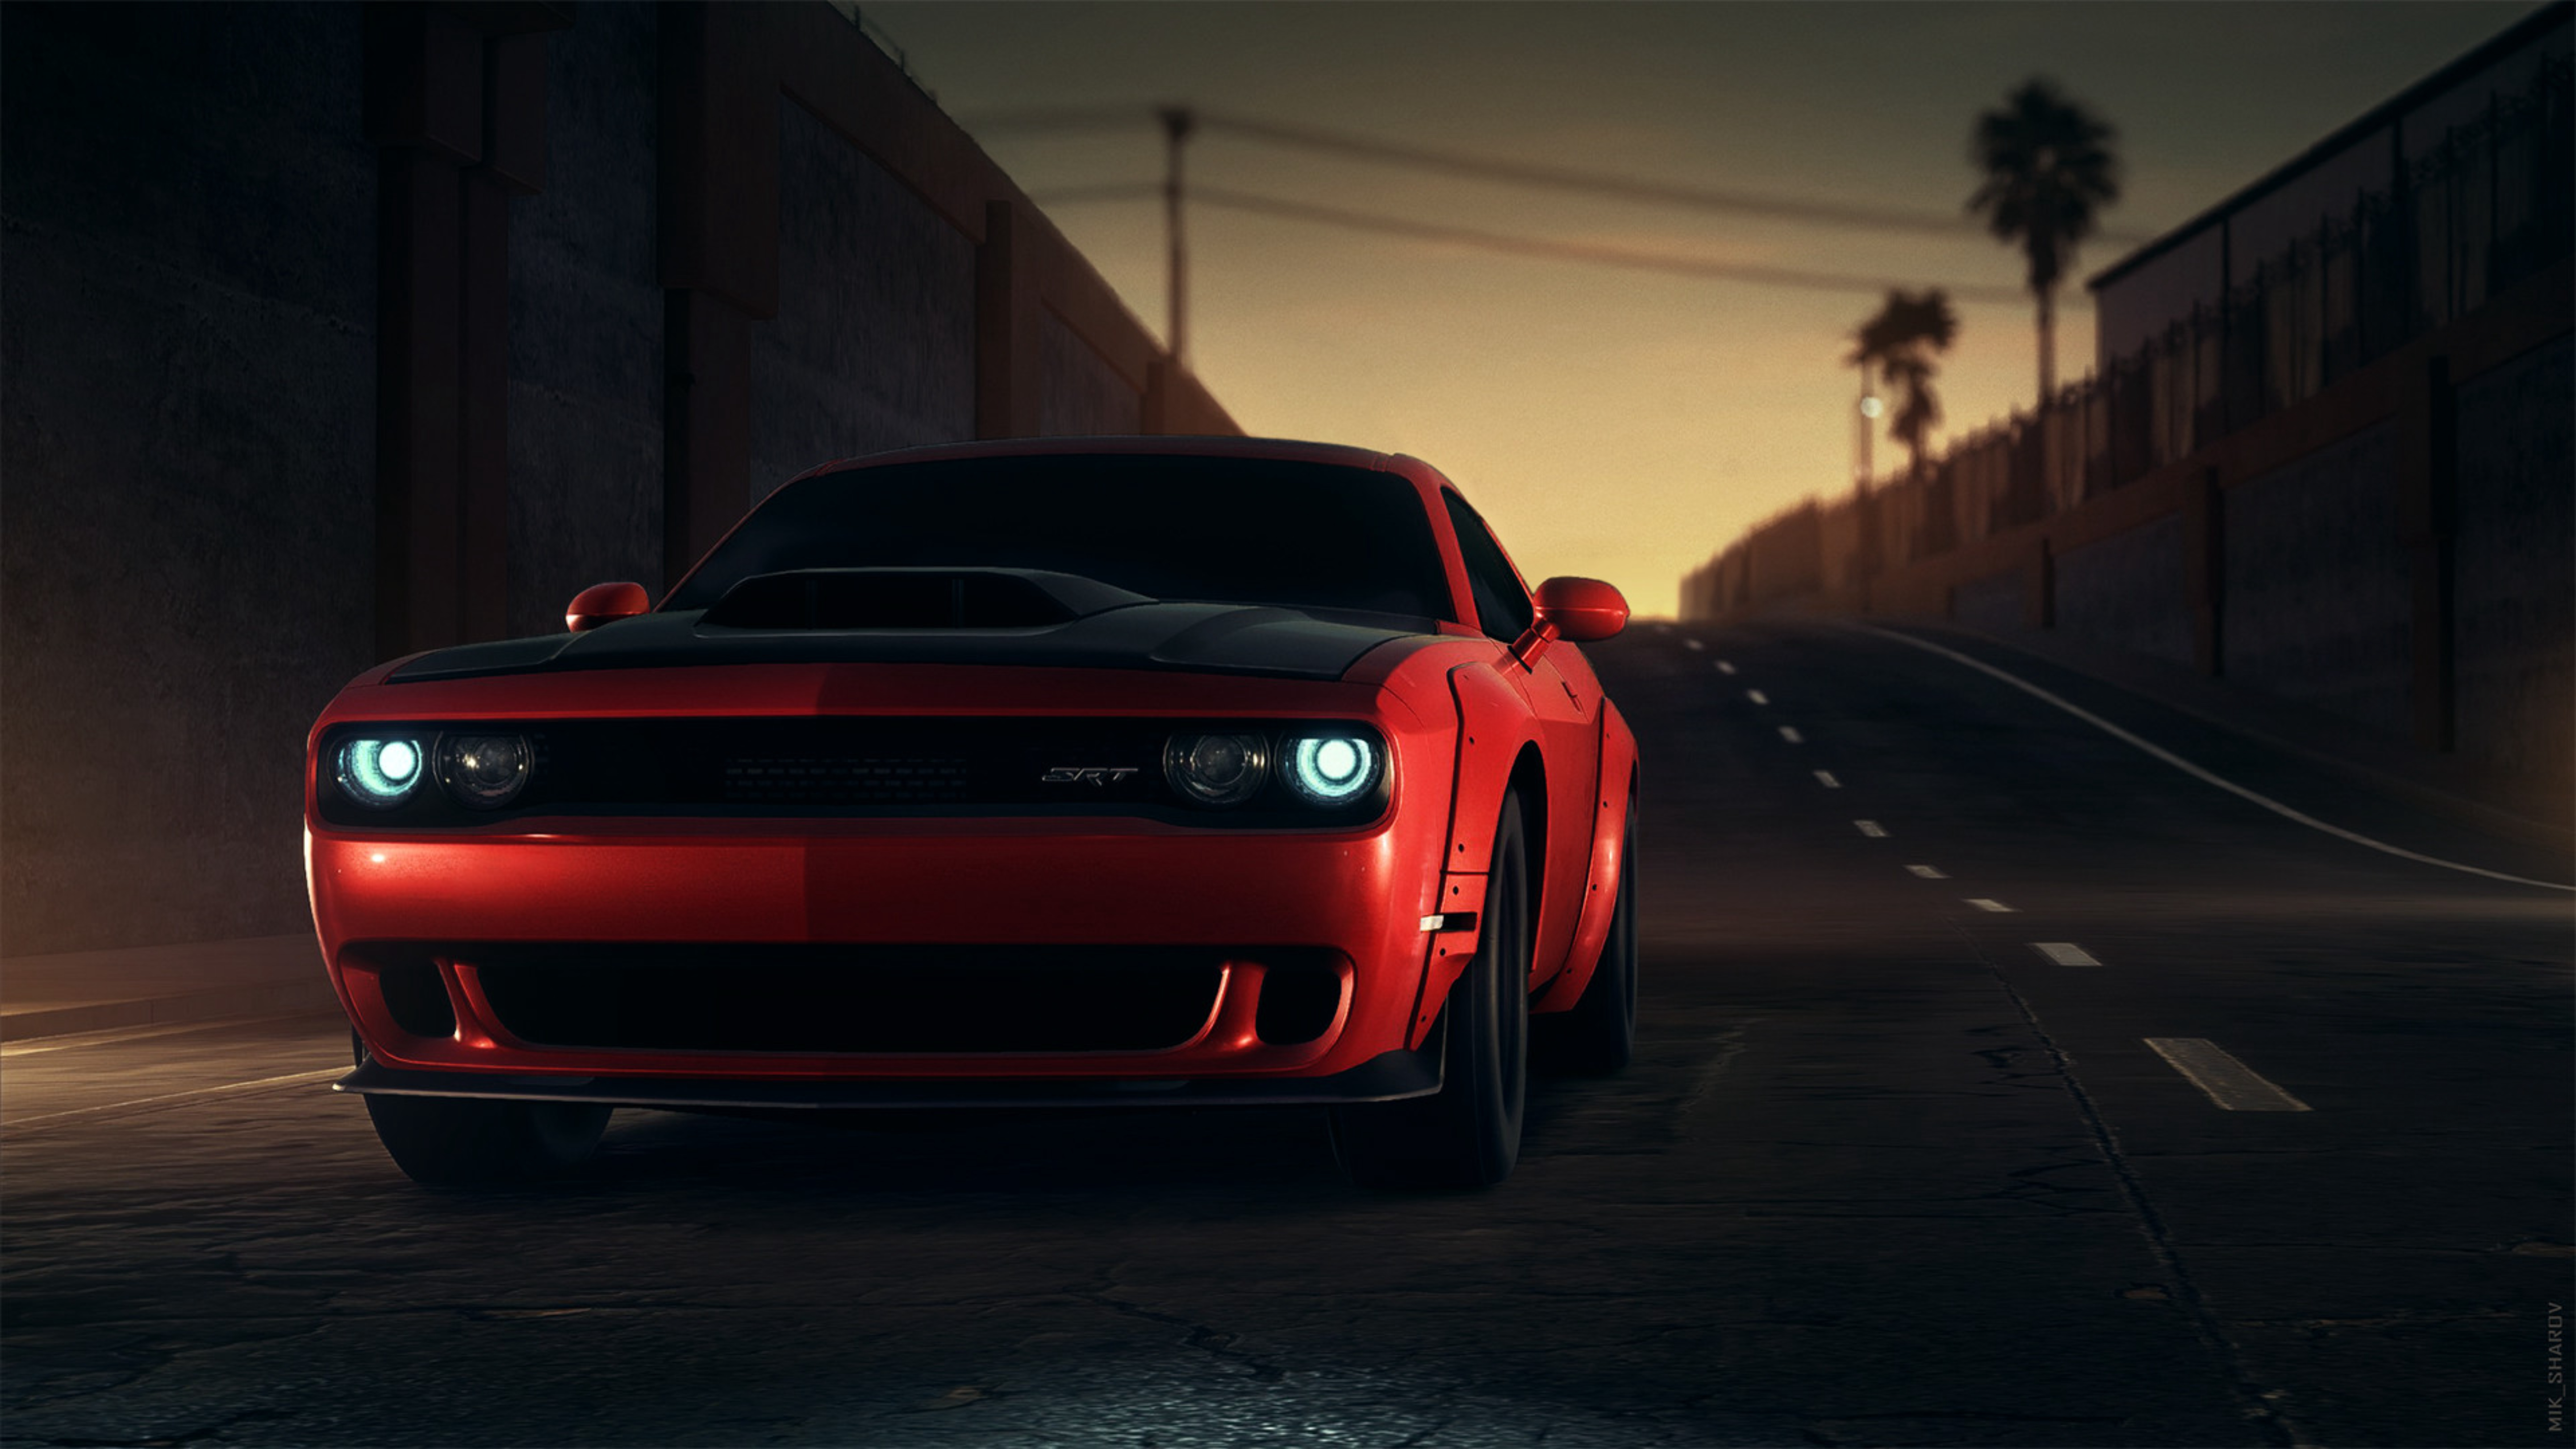 cars, sports car, front view, headlights, dodge srt, dodge, sports, red, lights Free Stock Photo